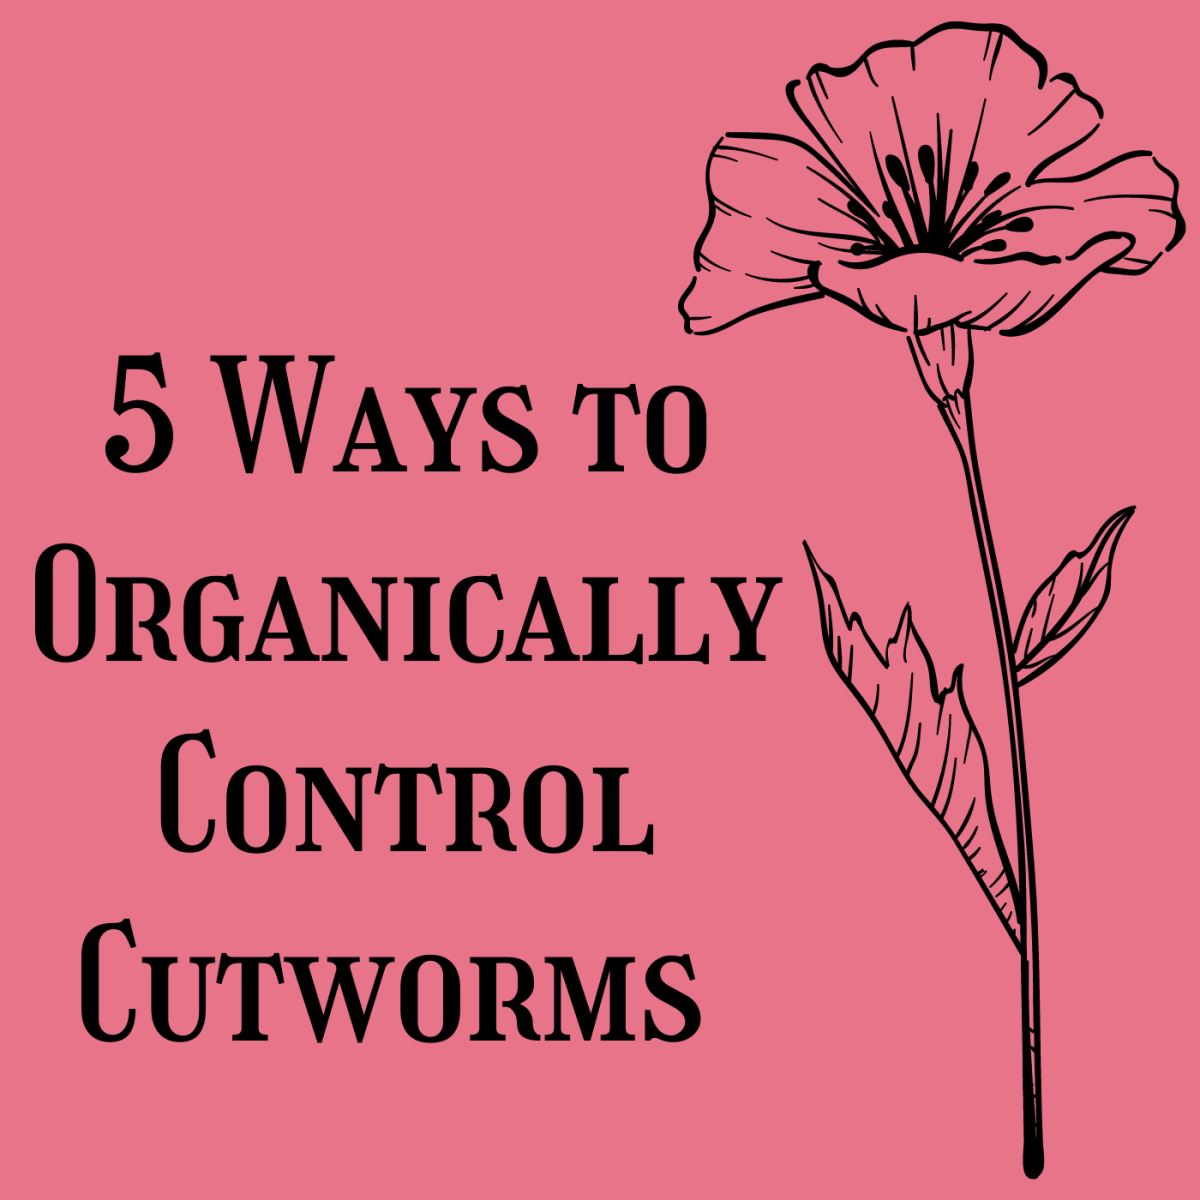 Controlling cutworms in your garden can be easy with these five tried and true methods.